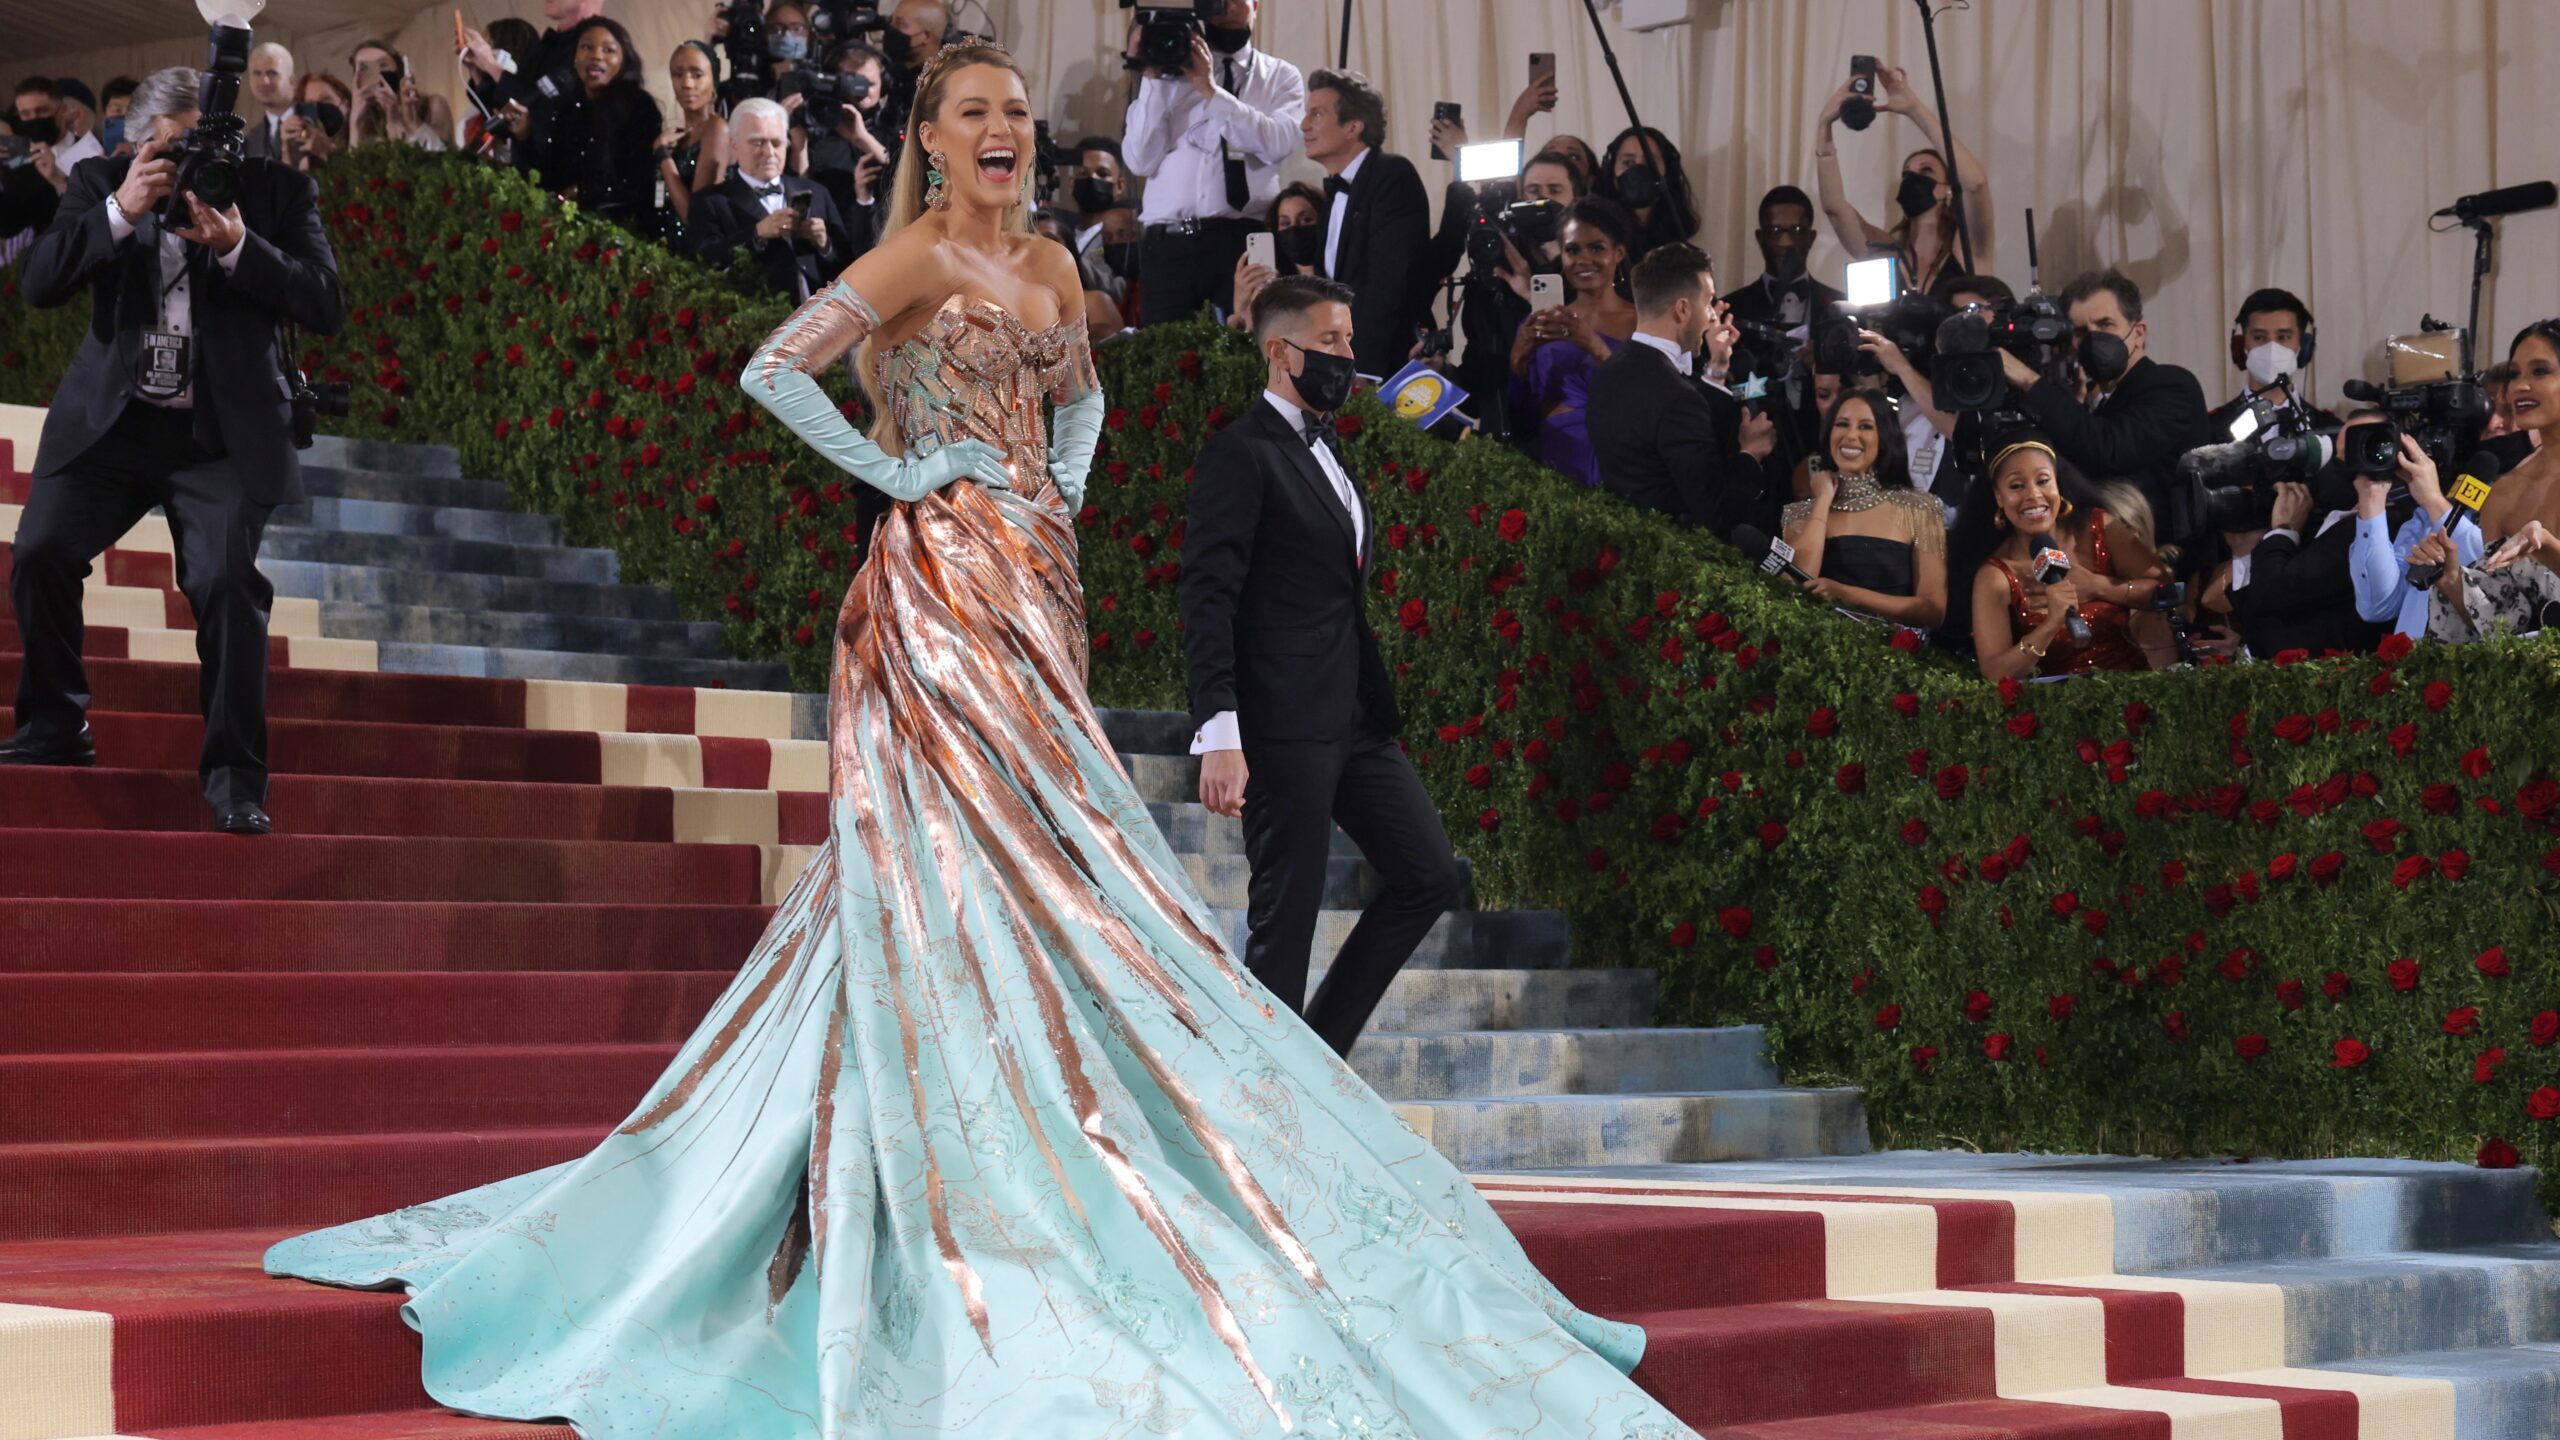 LOOK: Alicia Keys, Blake Lively offer sparkling odes to New York at Met Gala